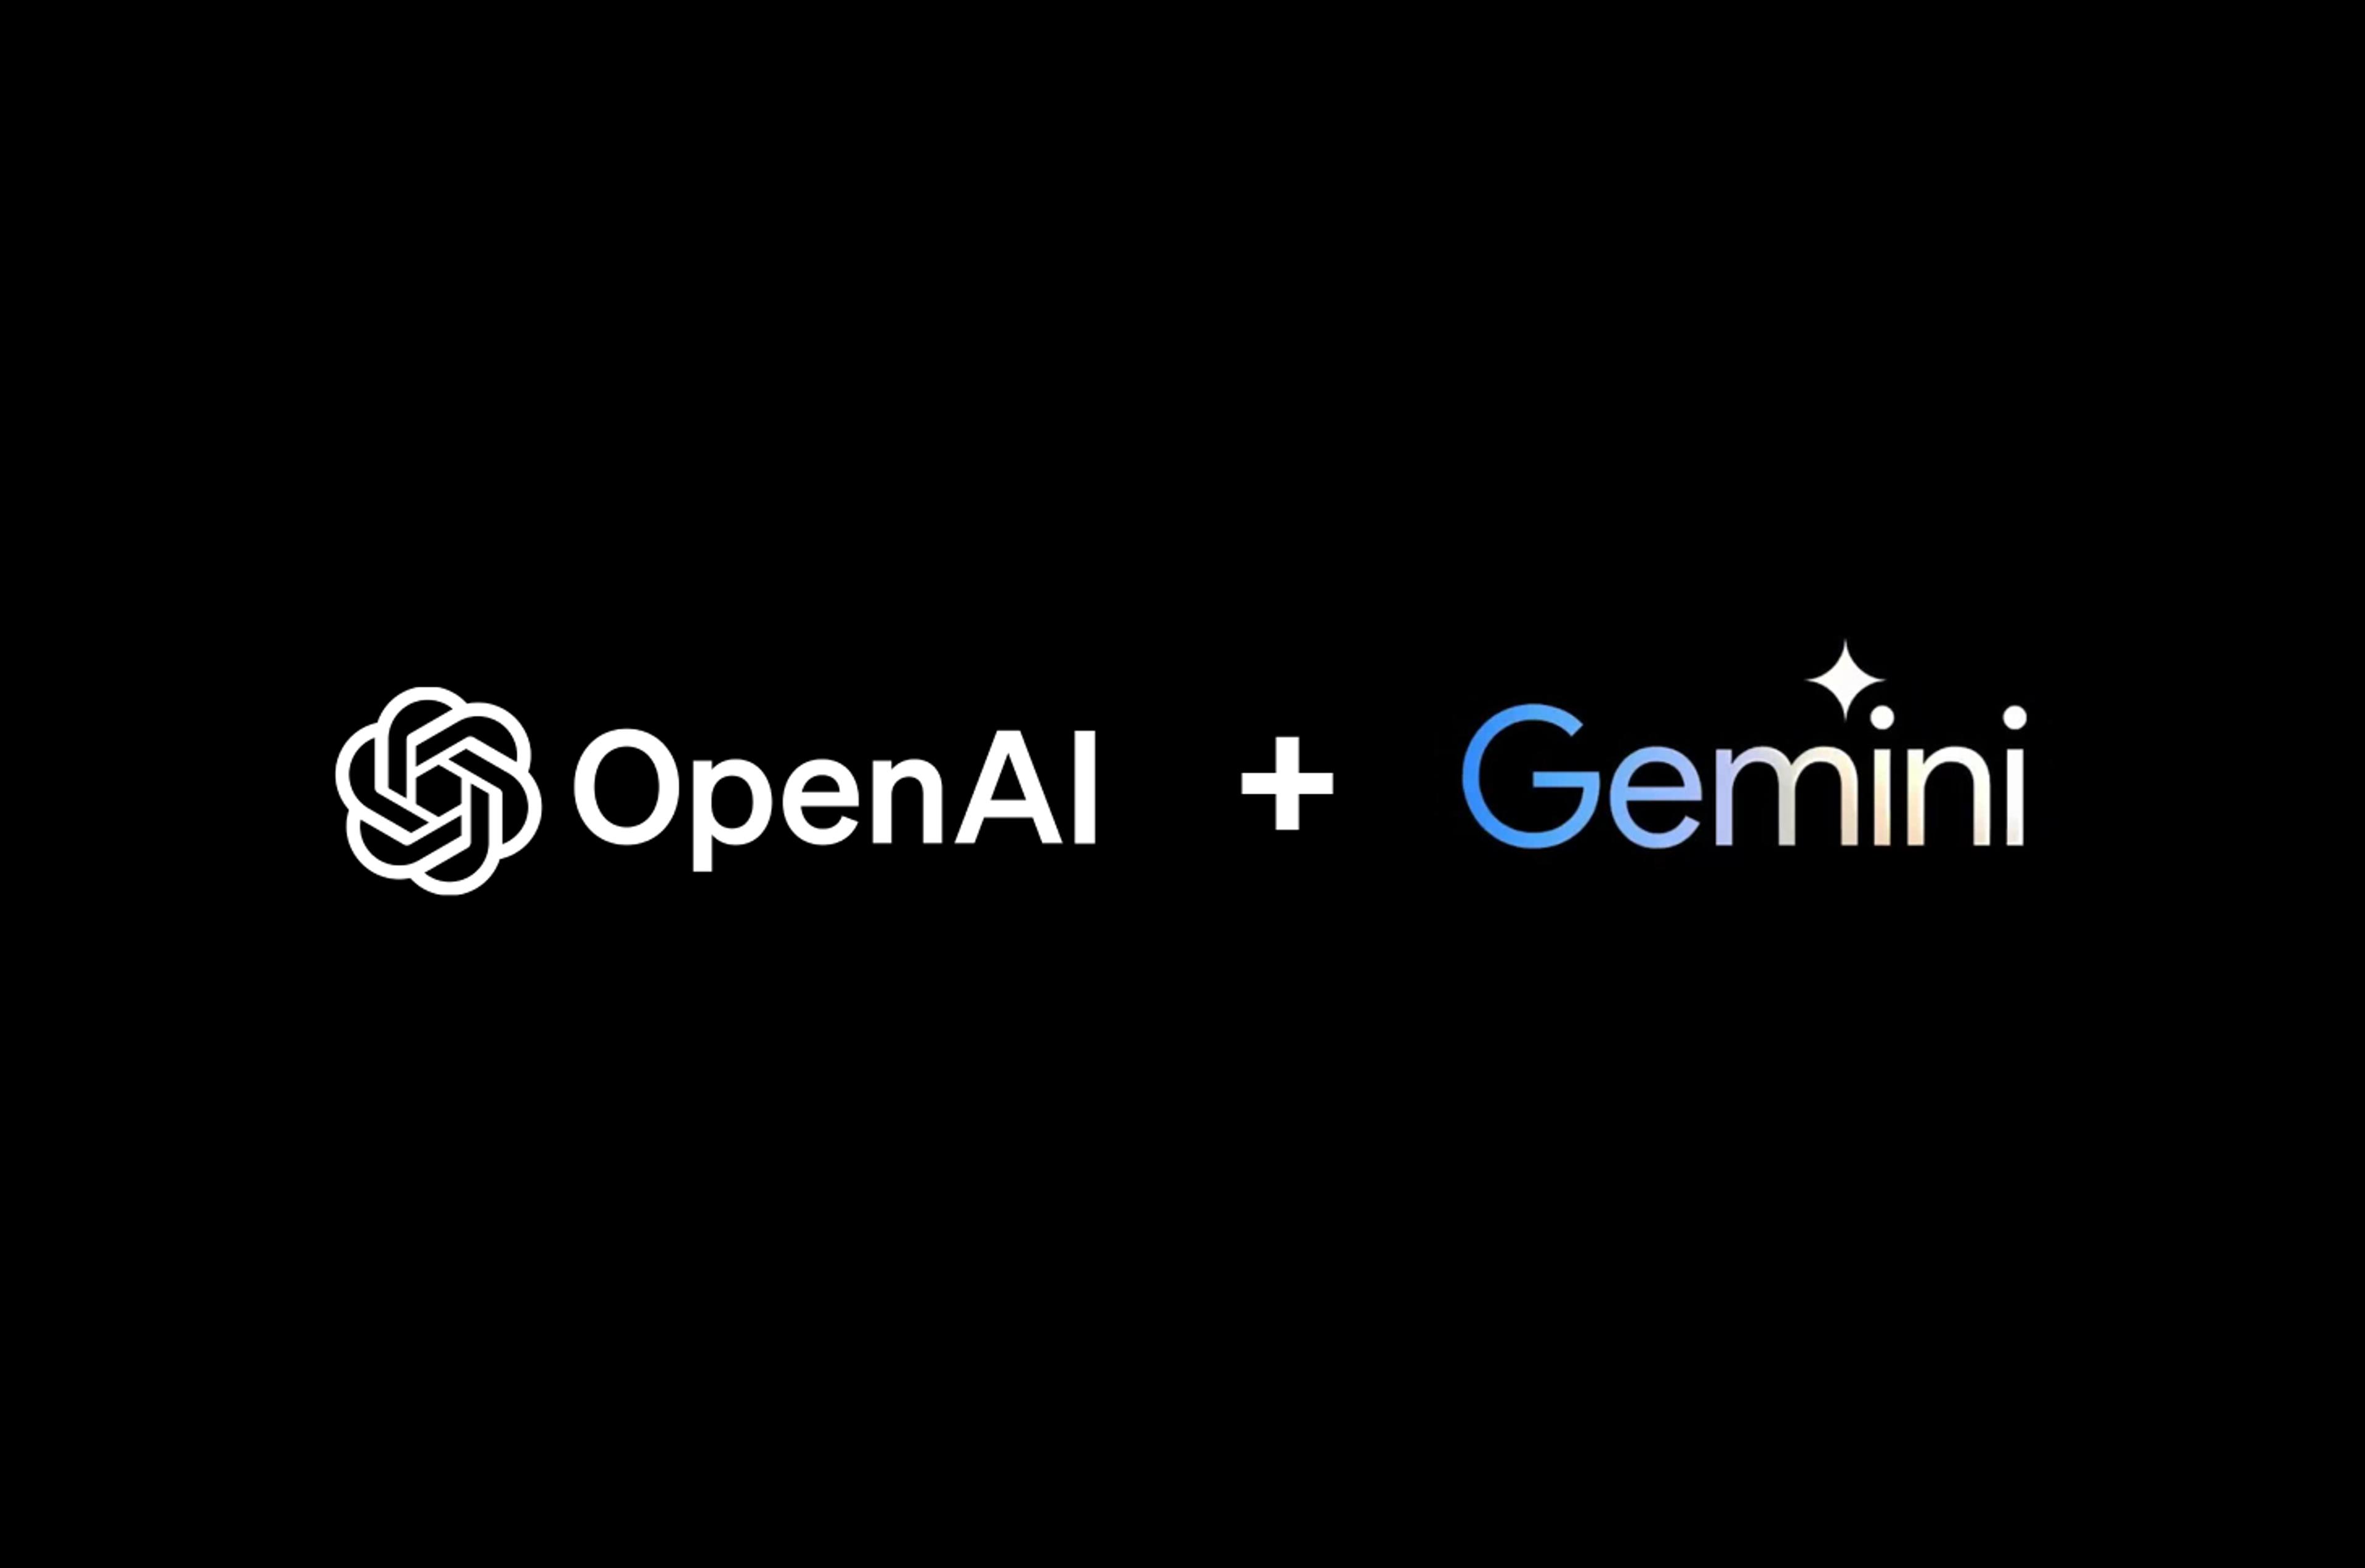 It’s Gemini Pro API Day, So the Astra Assistants API Is Getting Vertex AI Support!